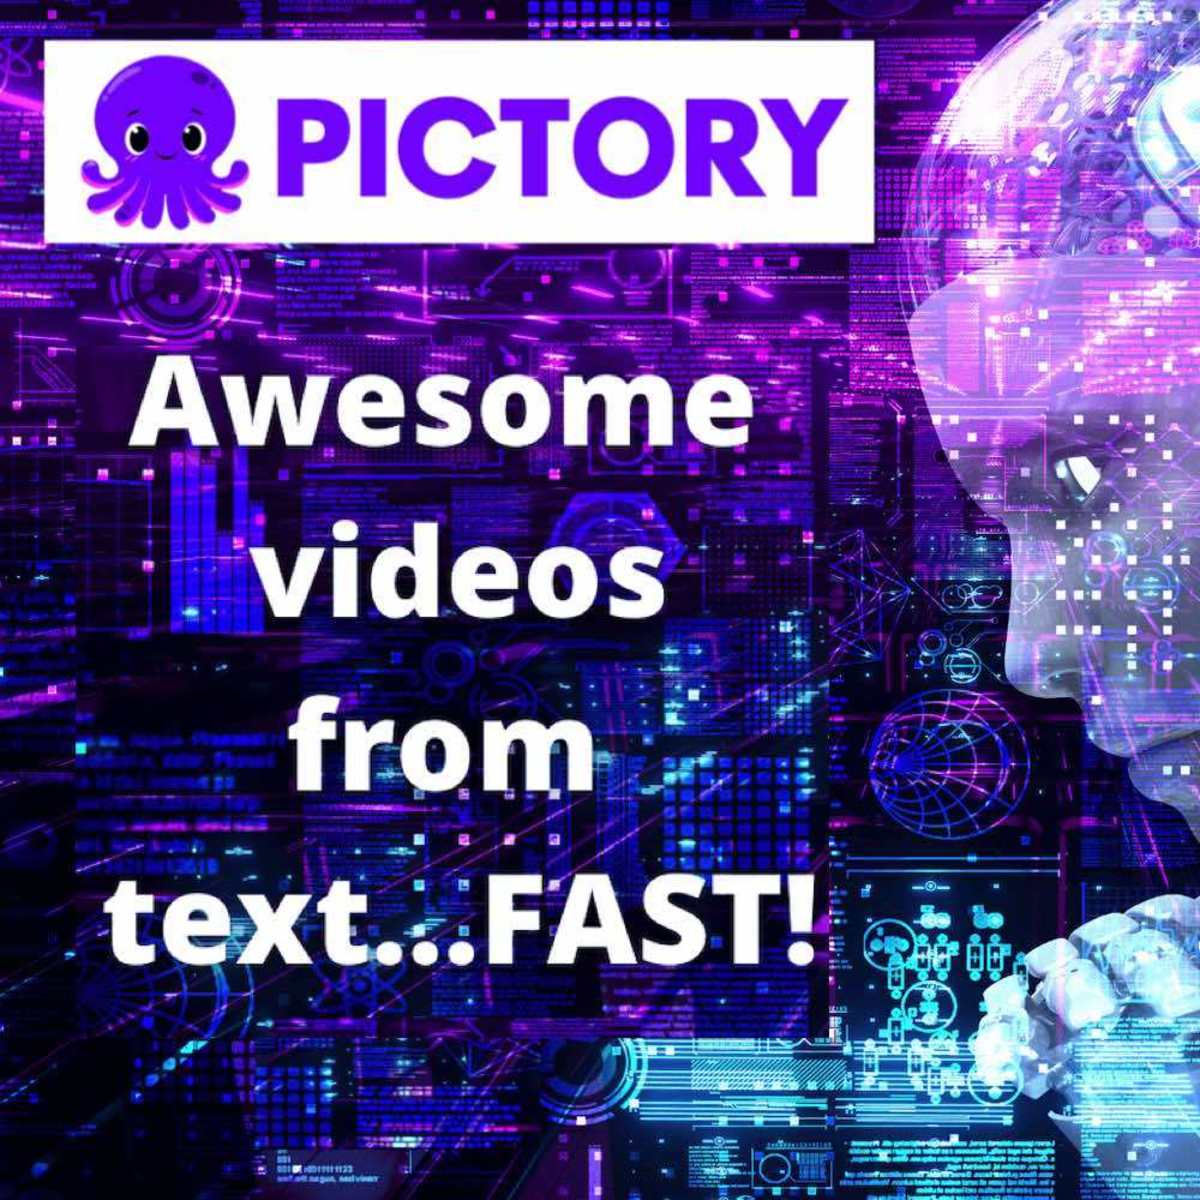 You can quickly create videos from your written content with Pictory.